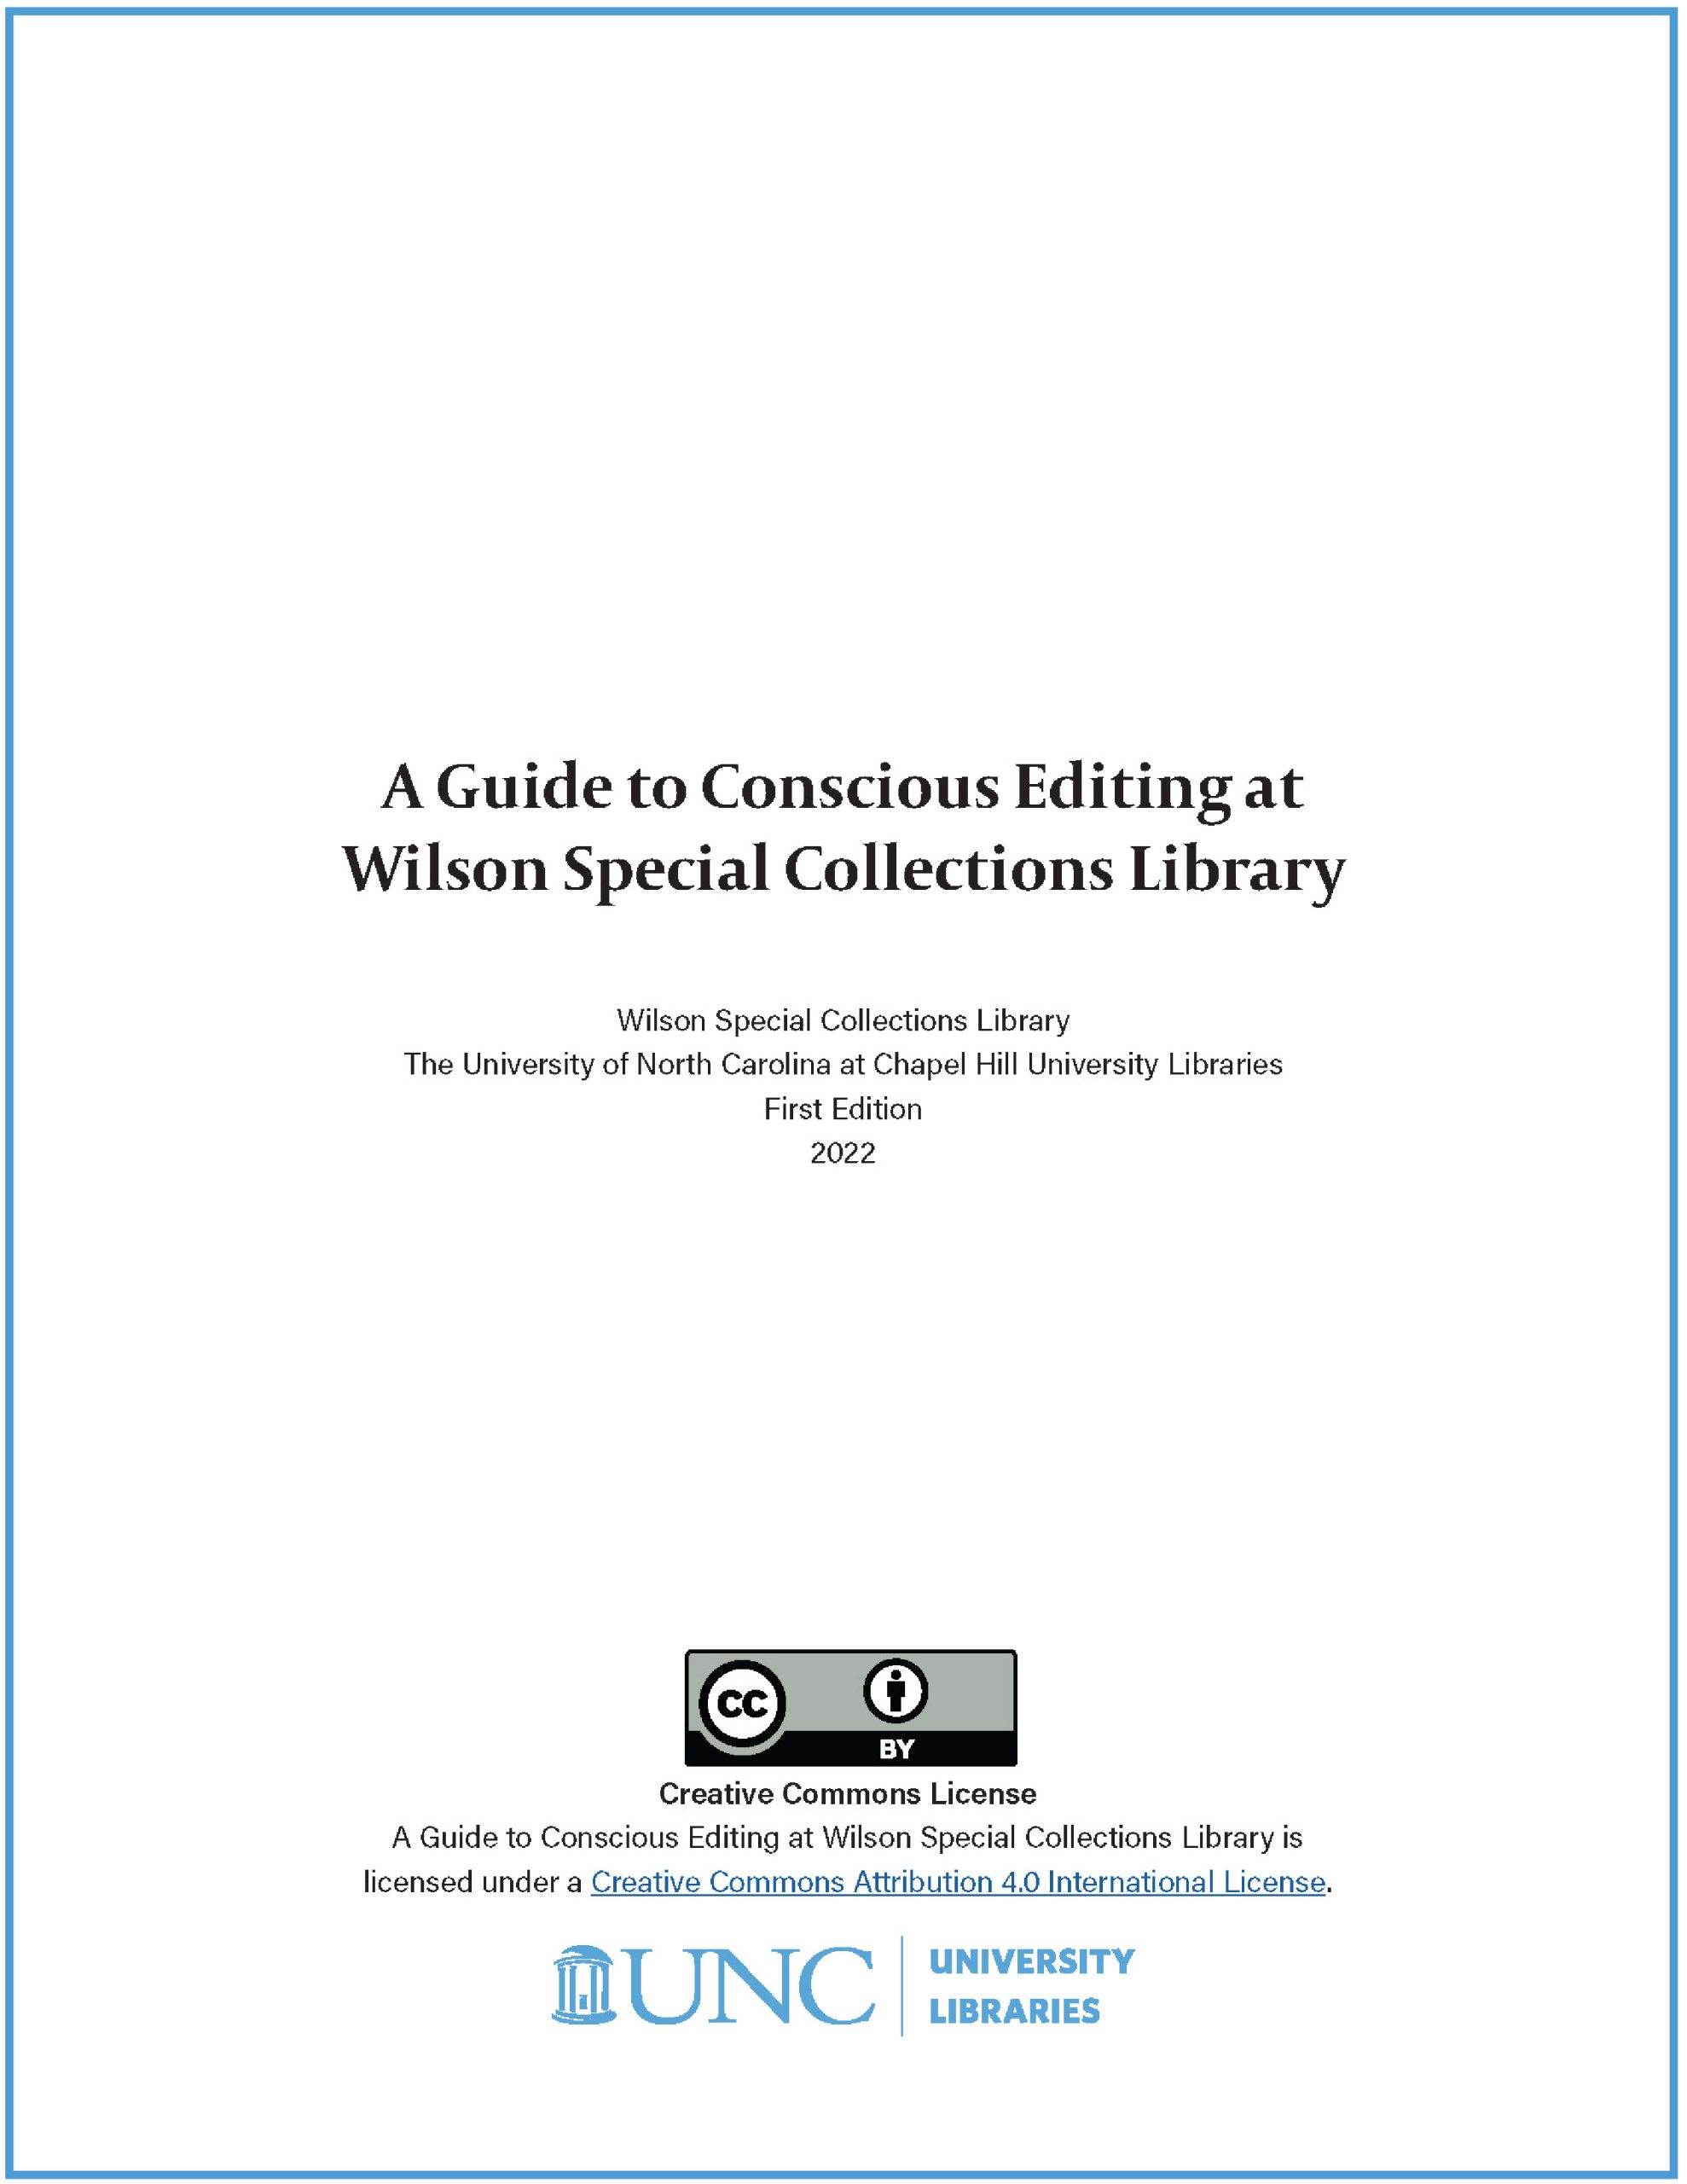 Front Page of Conscious Editing Guide